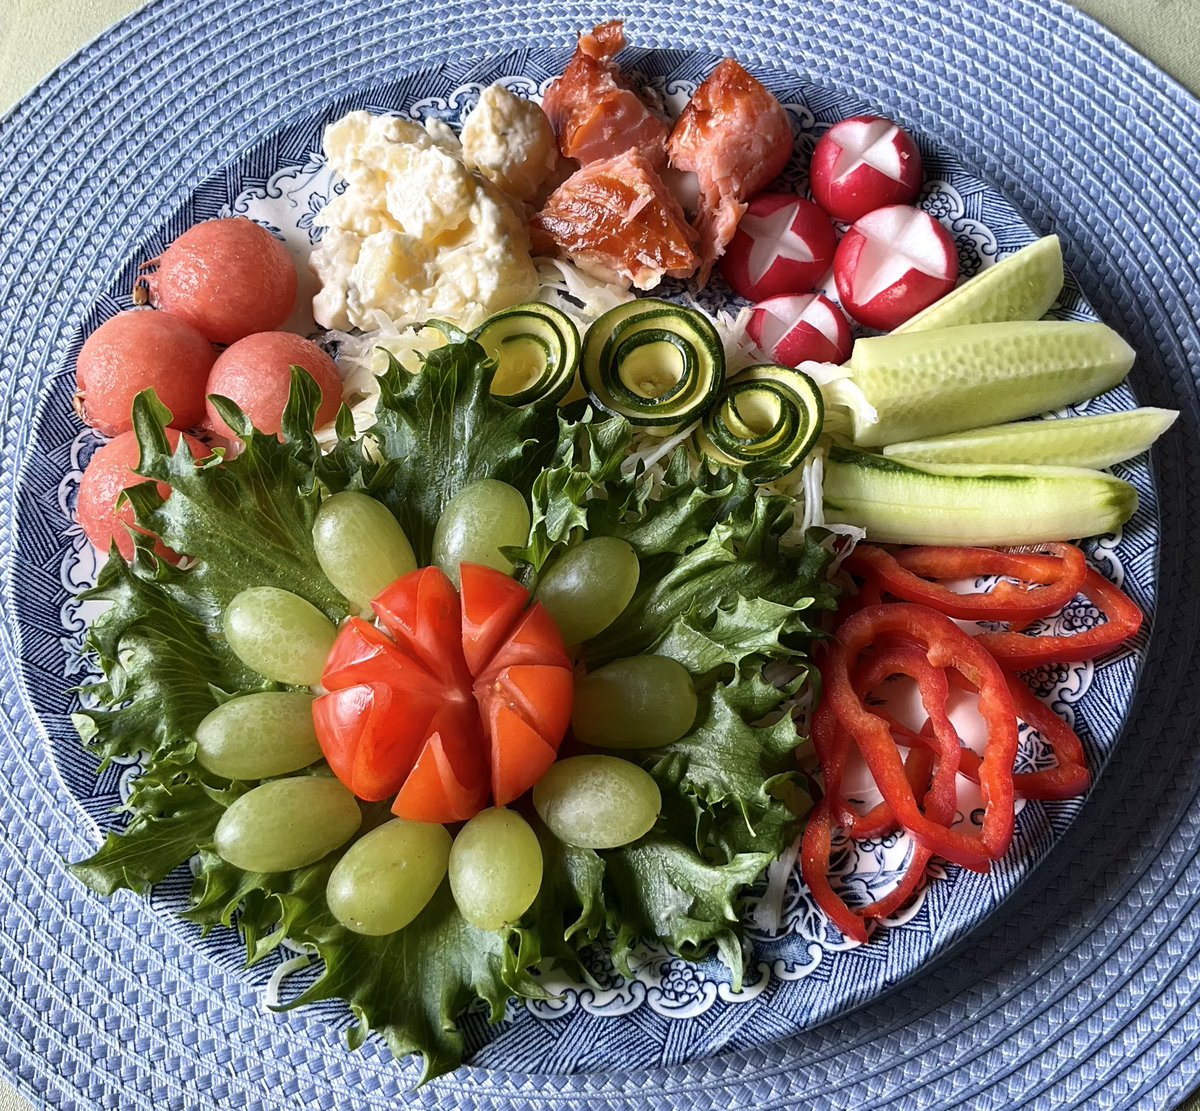 +24ºC! 1º over my comfort limit, too hot! 🥵 I’ll postpone my garden day and try again tomorrow! For hubby’s gluten-free breakfast: iceberg lettuce, grapes, tomato, watermelon, potato salad, smoked salmon, radish, cucumber, bell pepper, zucchini, cabbage, no chilli.